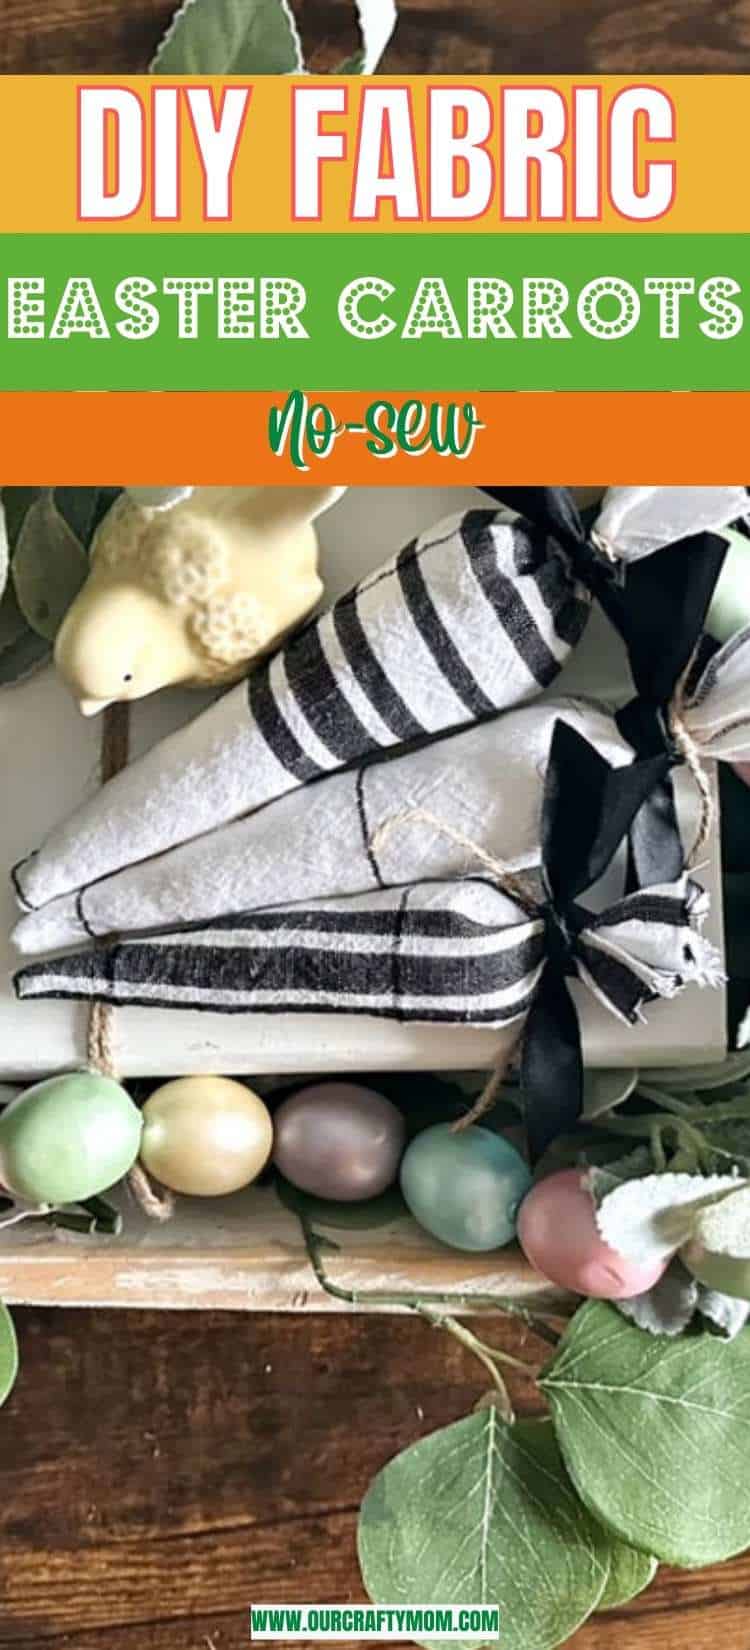 diy fabric carrots pin collage